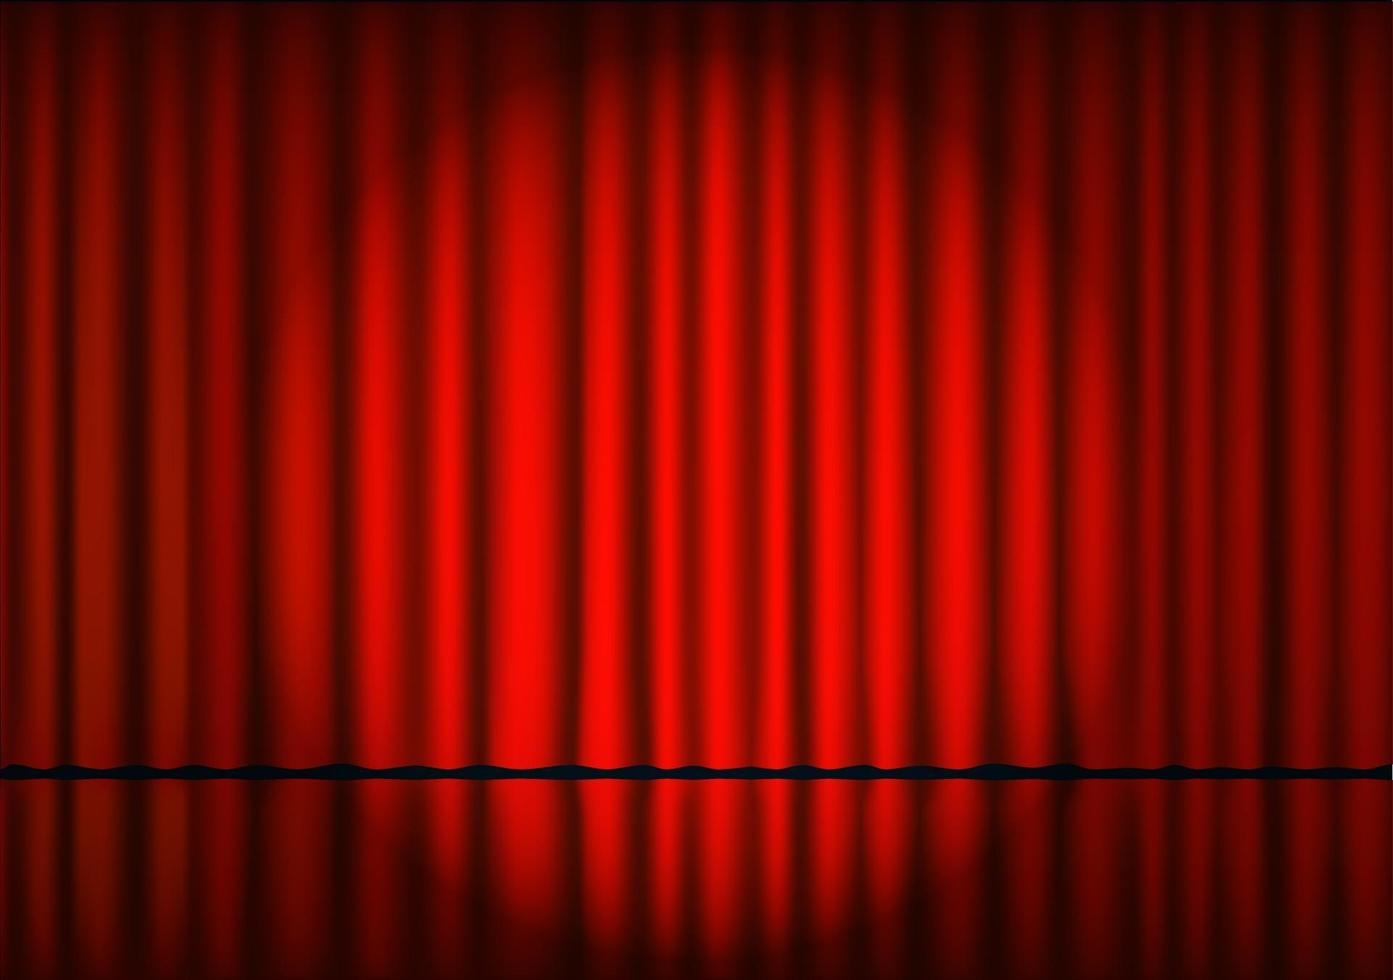 Red theatrical curtain background vector illustration.